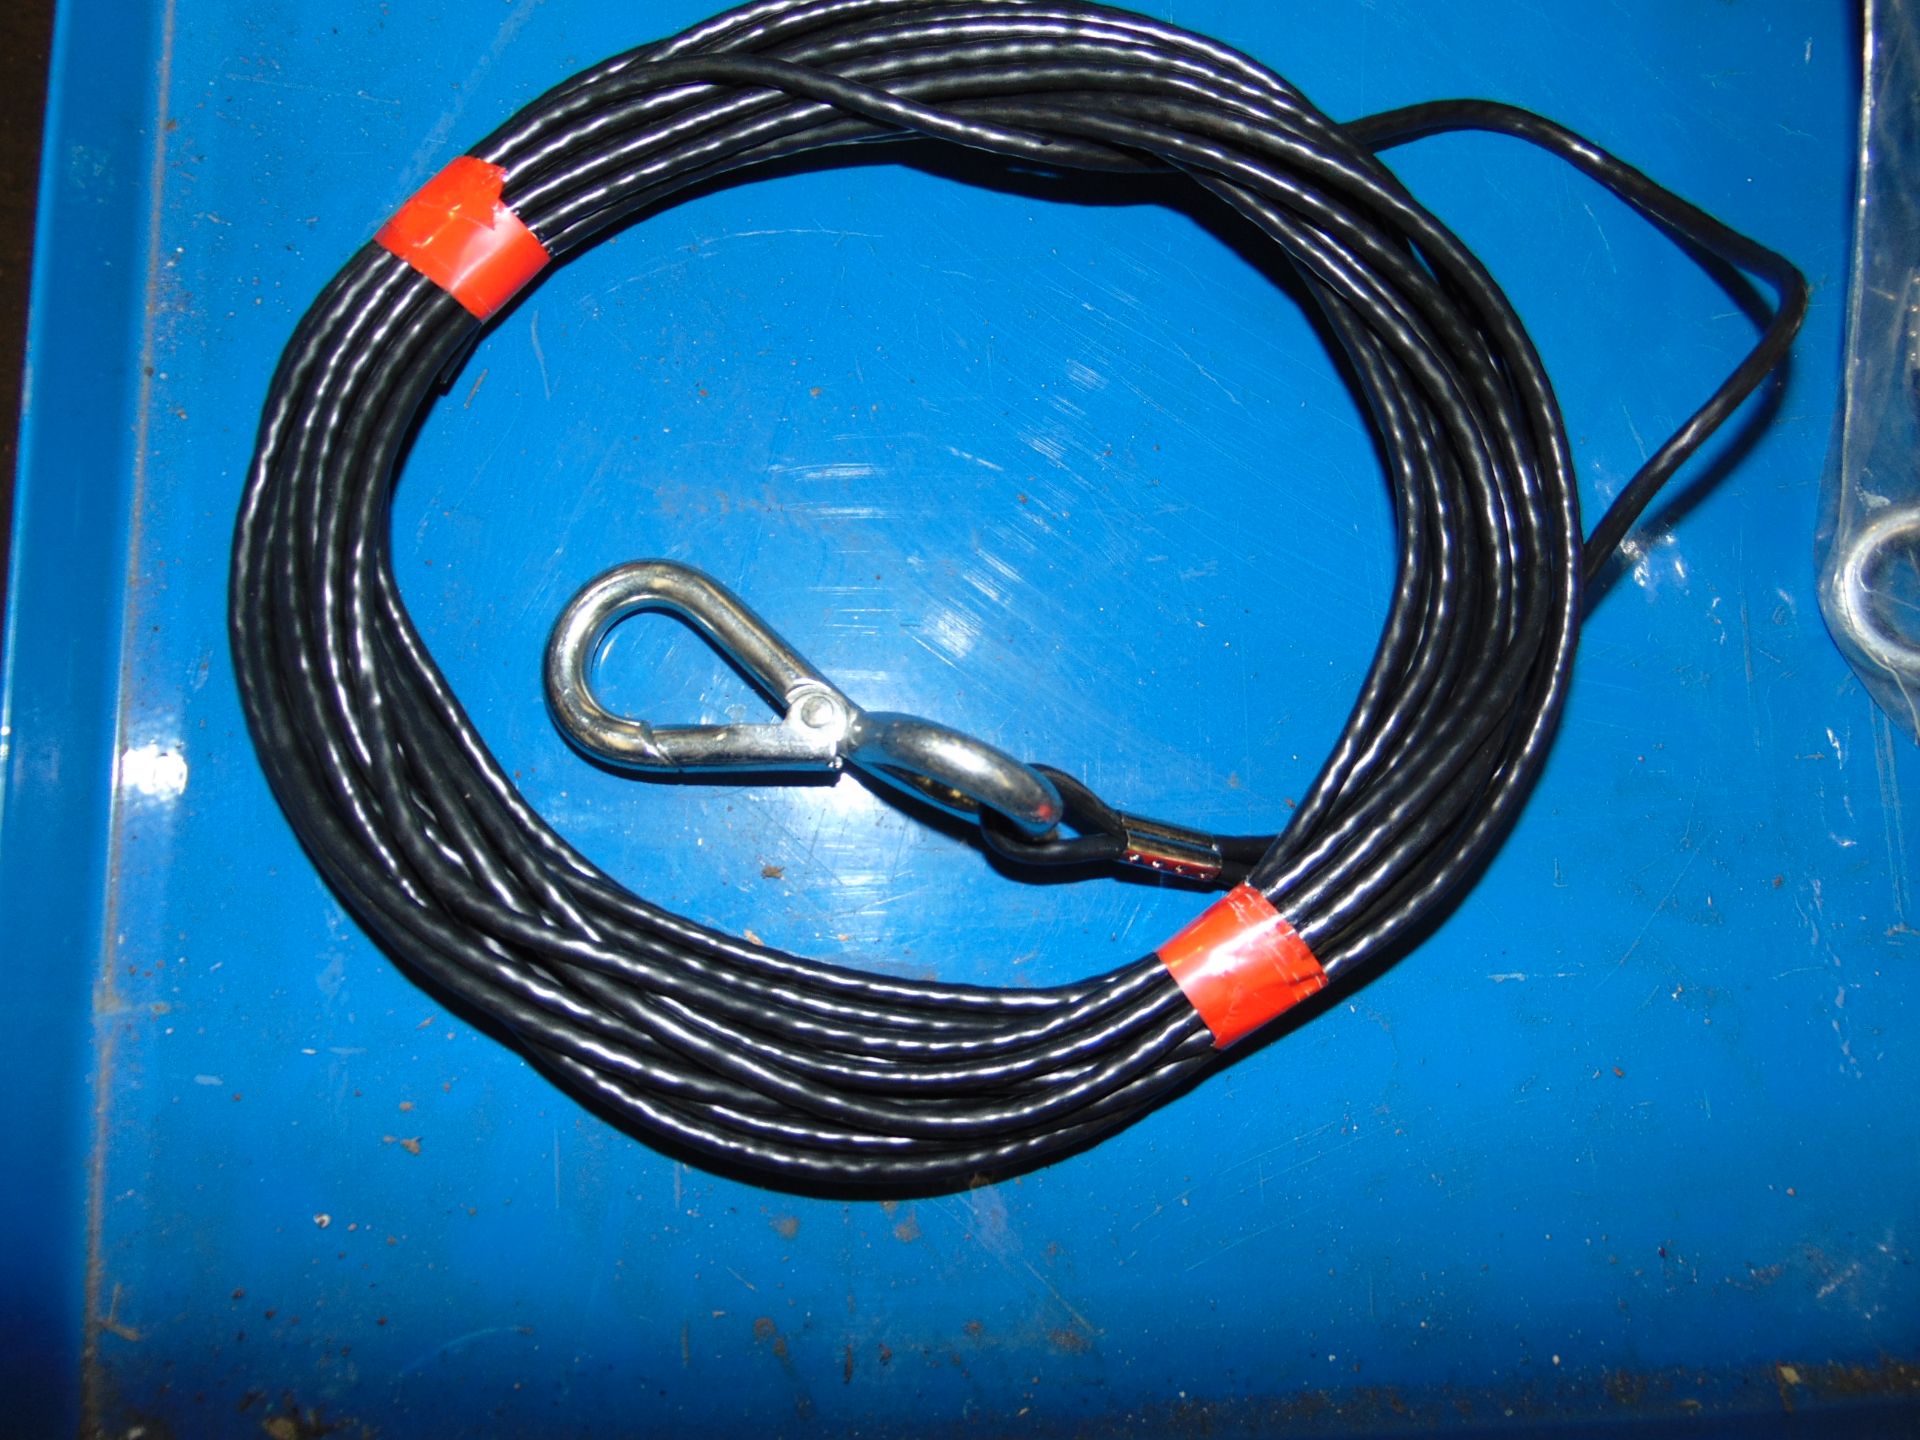 90X 8M CORDS WITH STAINLESS STEEL HOOKS - Image 2 of 3